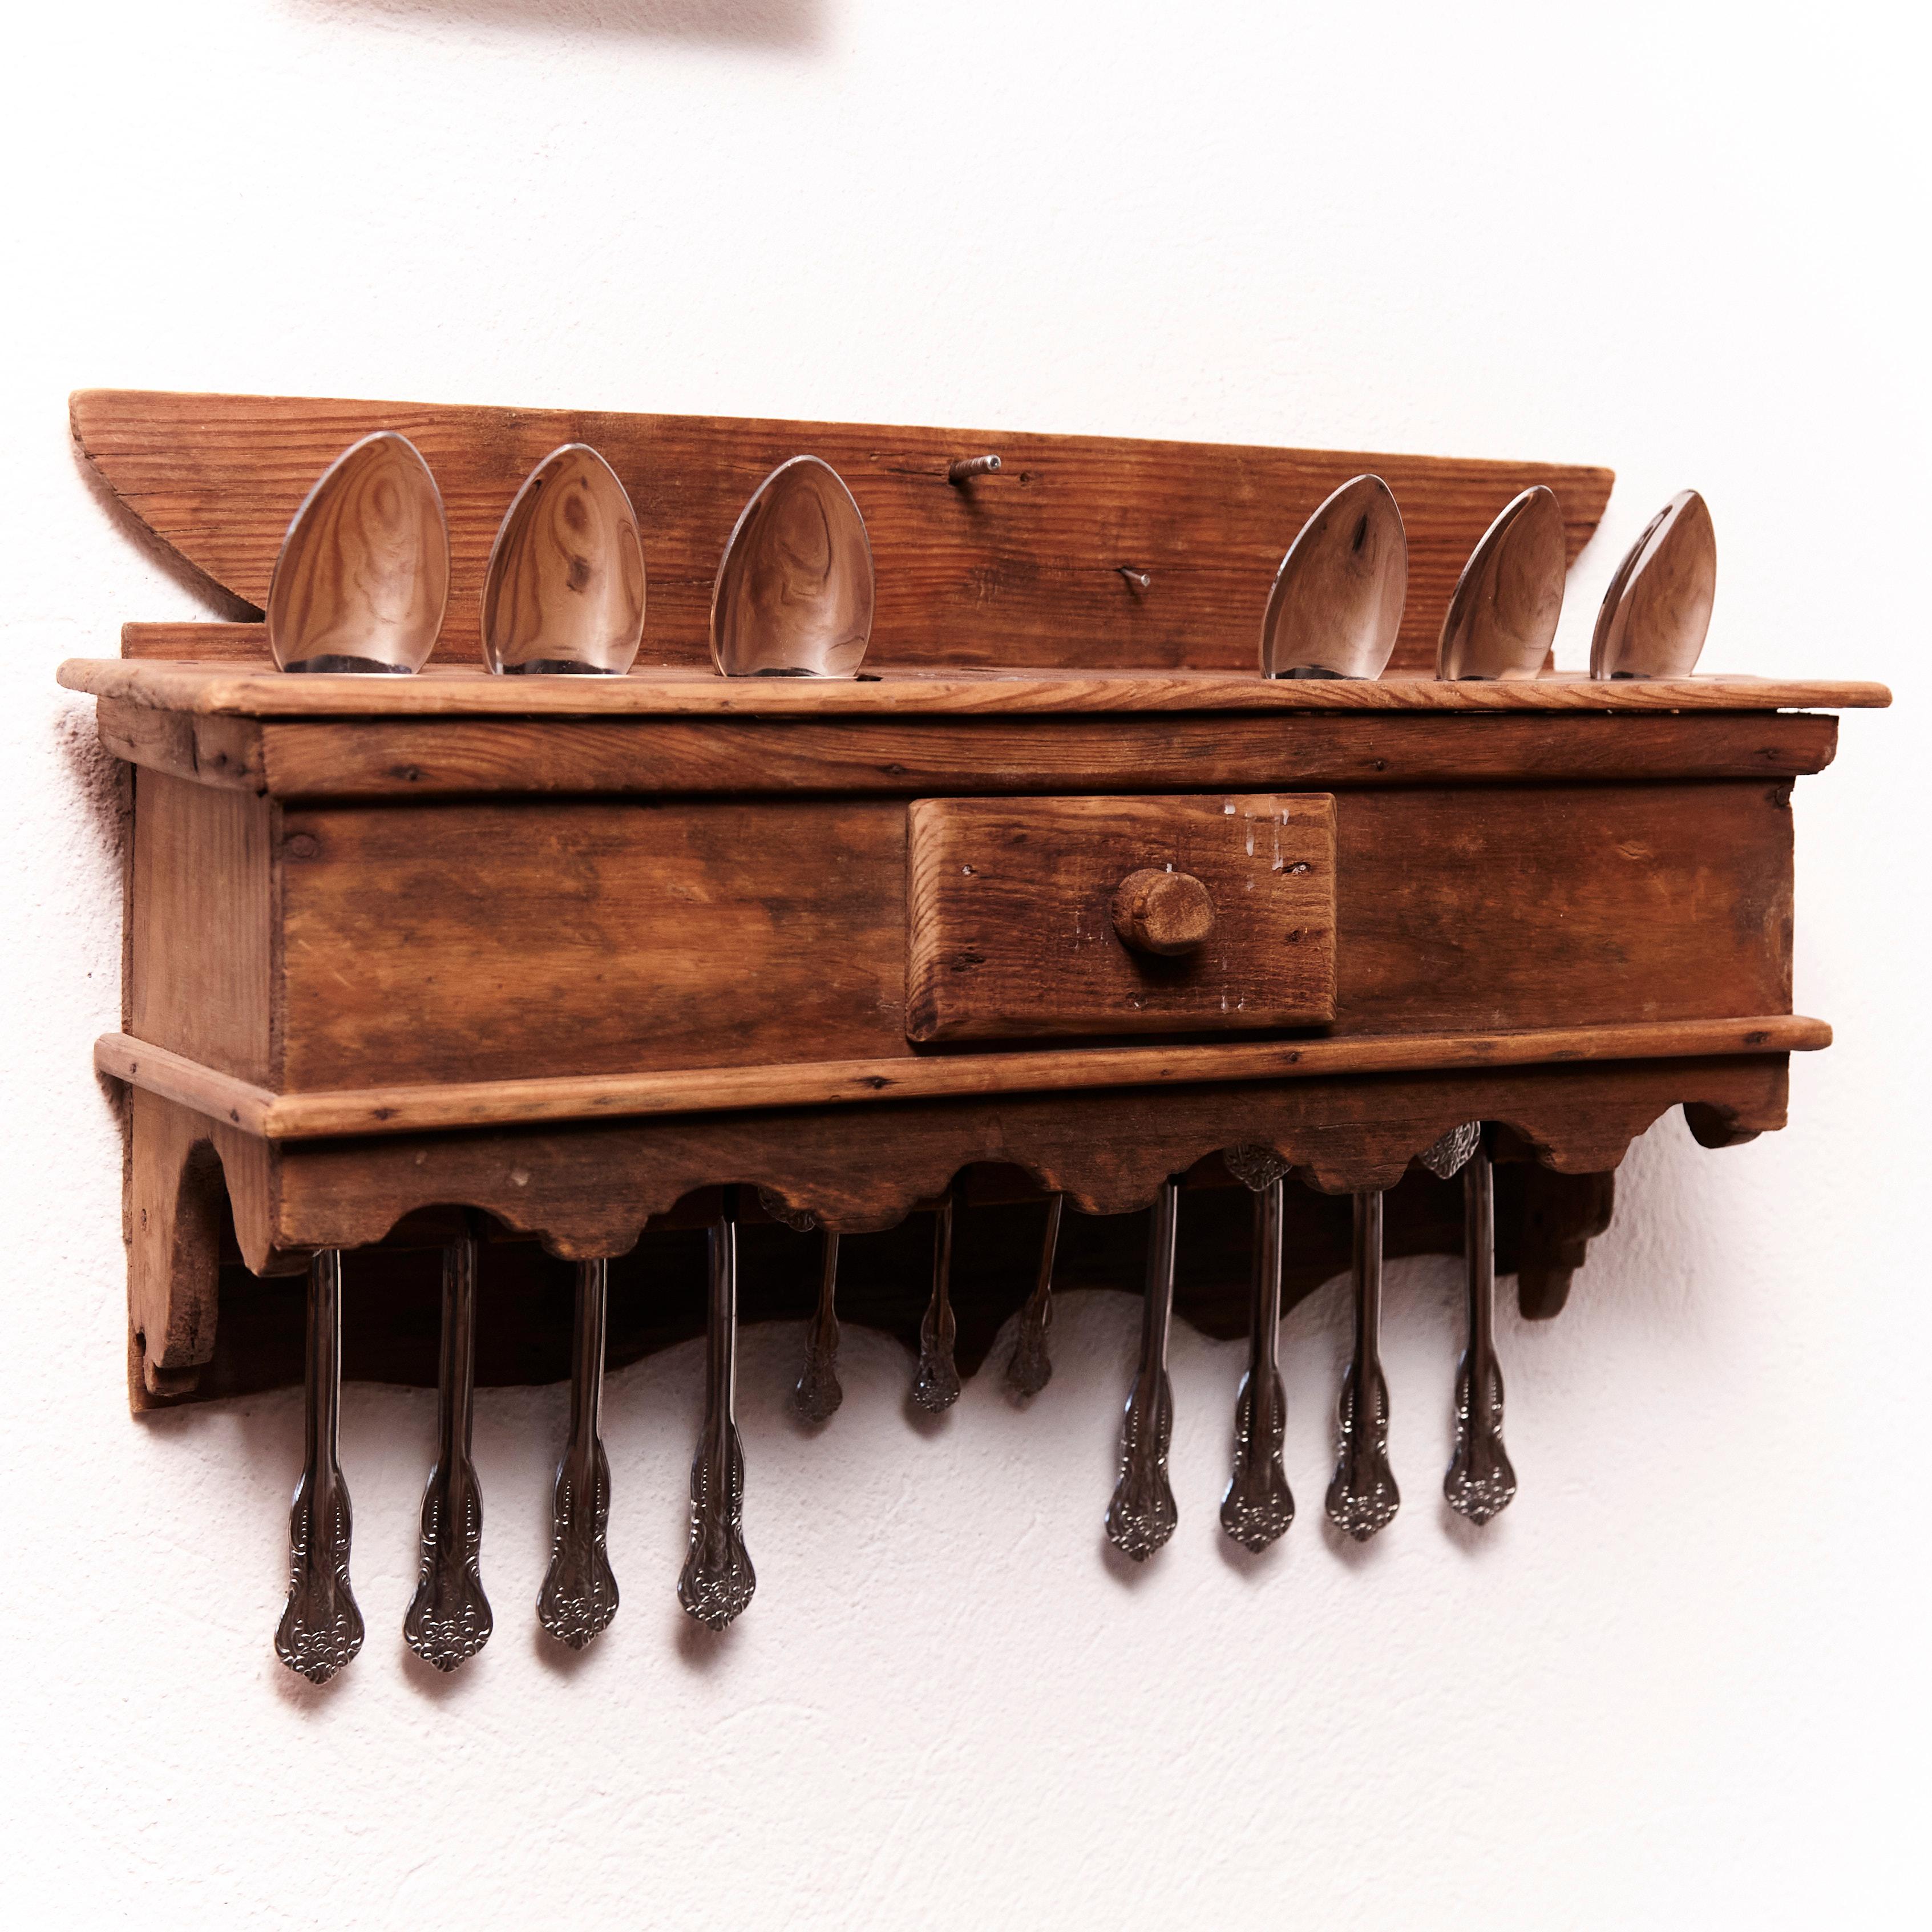 Mid-20th Century Traditional Spanish Wood Cutlery Holder, circa 1930 For Sale